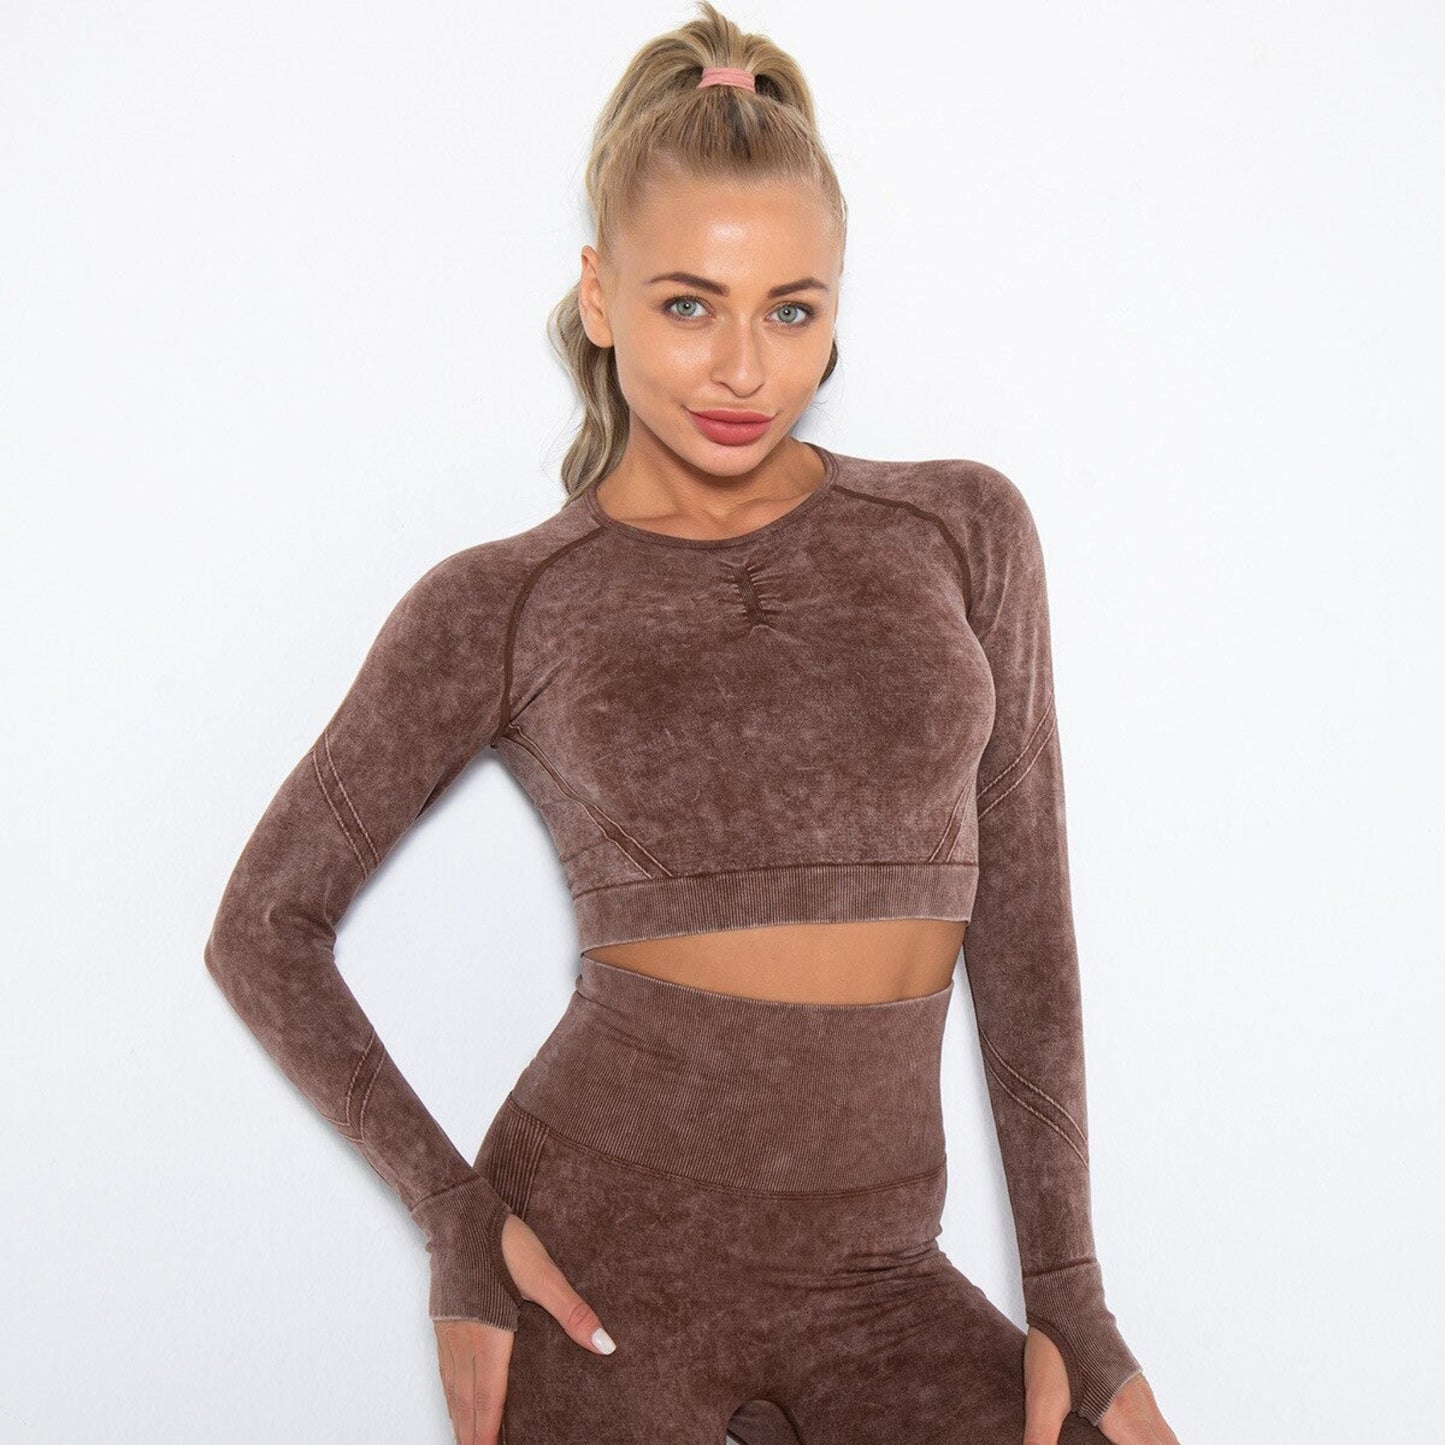 MODEL WEARING ARIA WORKOUT CROP TOP  IN BROWN  FEATURING THUMBHOLES ON SLEEVES, FROM VIBRAS ACTIVEWEAR.